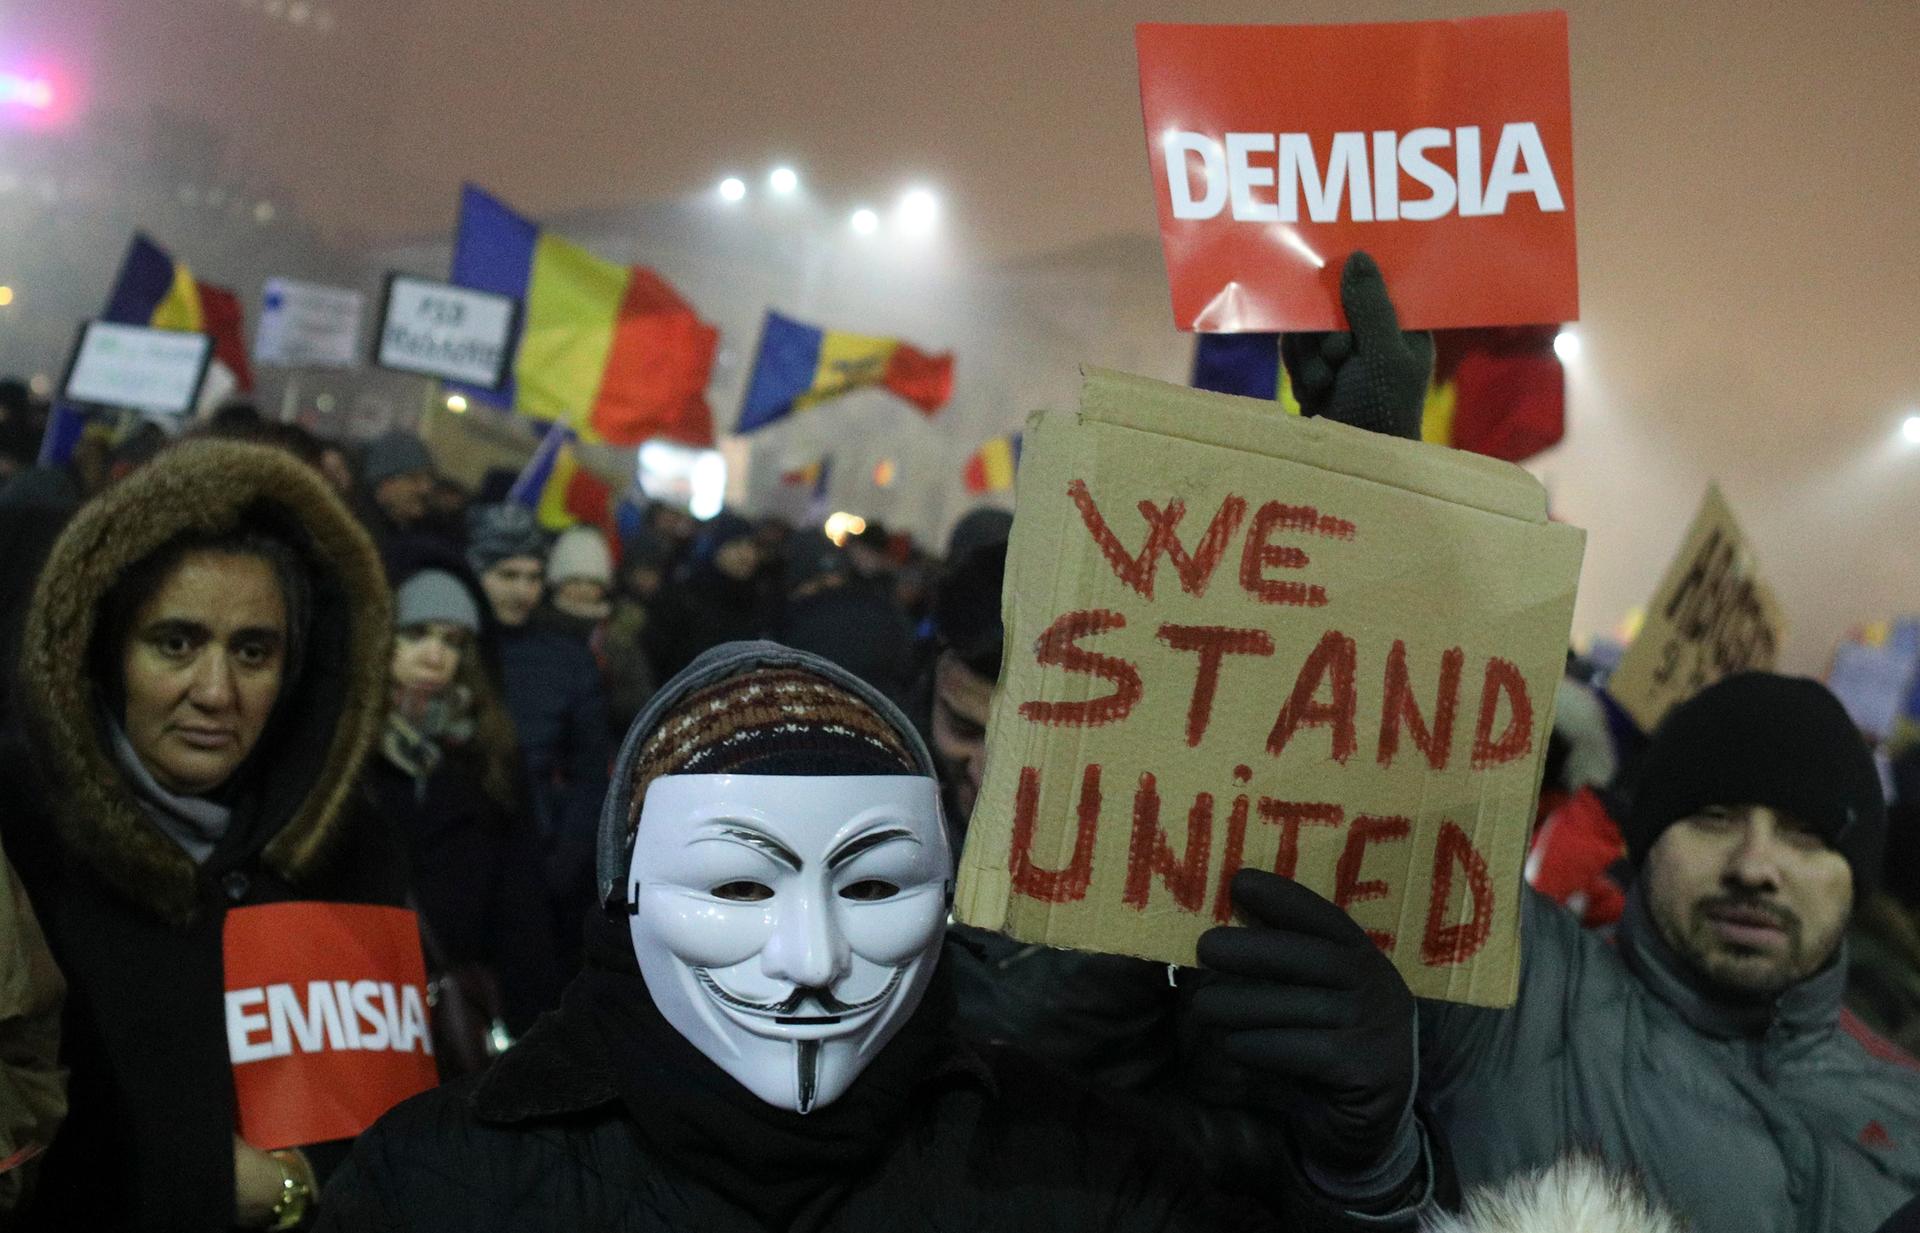 A Romanian holds a sign that reads "we stand united" during a demonstration of thousands against the  government in Bucharest, Romania, Feb. 6, 2017.